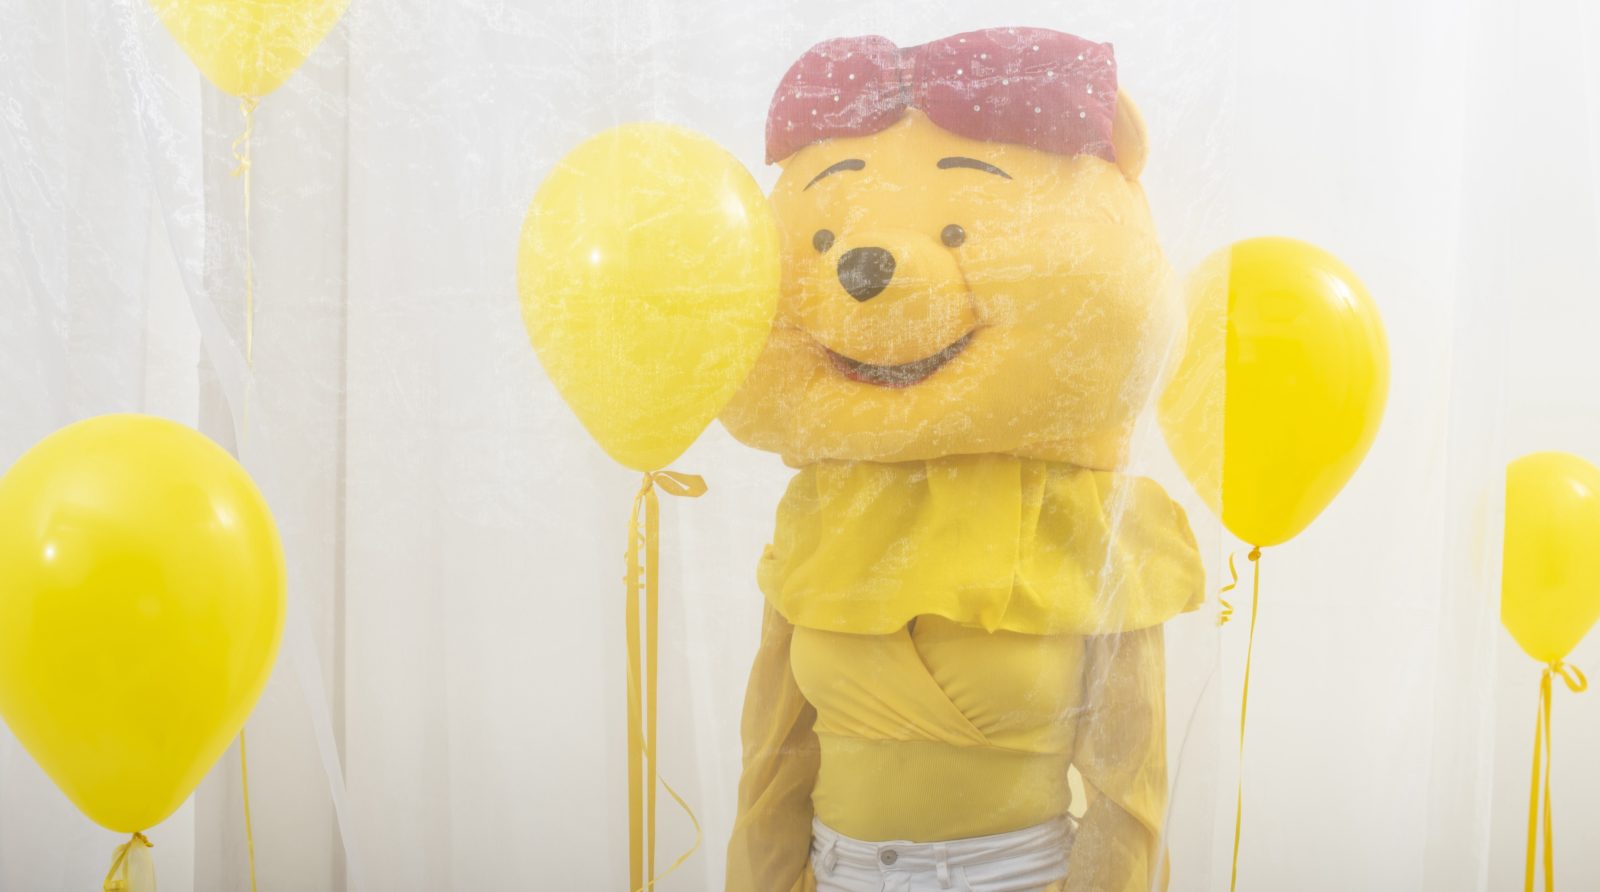 A person stands behind a piece of white netting, wearing a yellow top and a yellow bear mascot hat on their head. They are surrounded by yellow balloons.